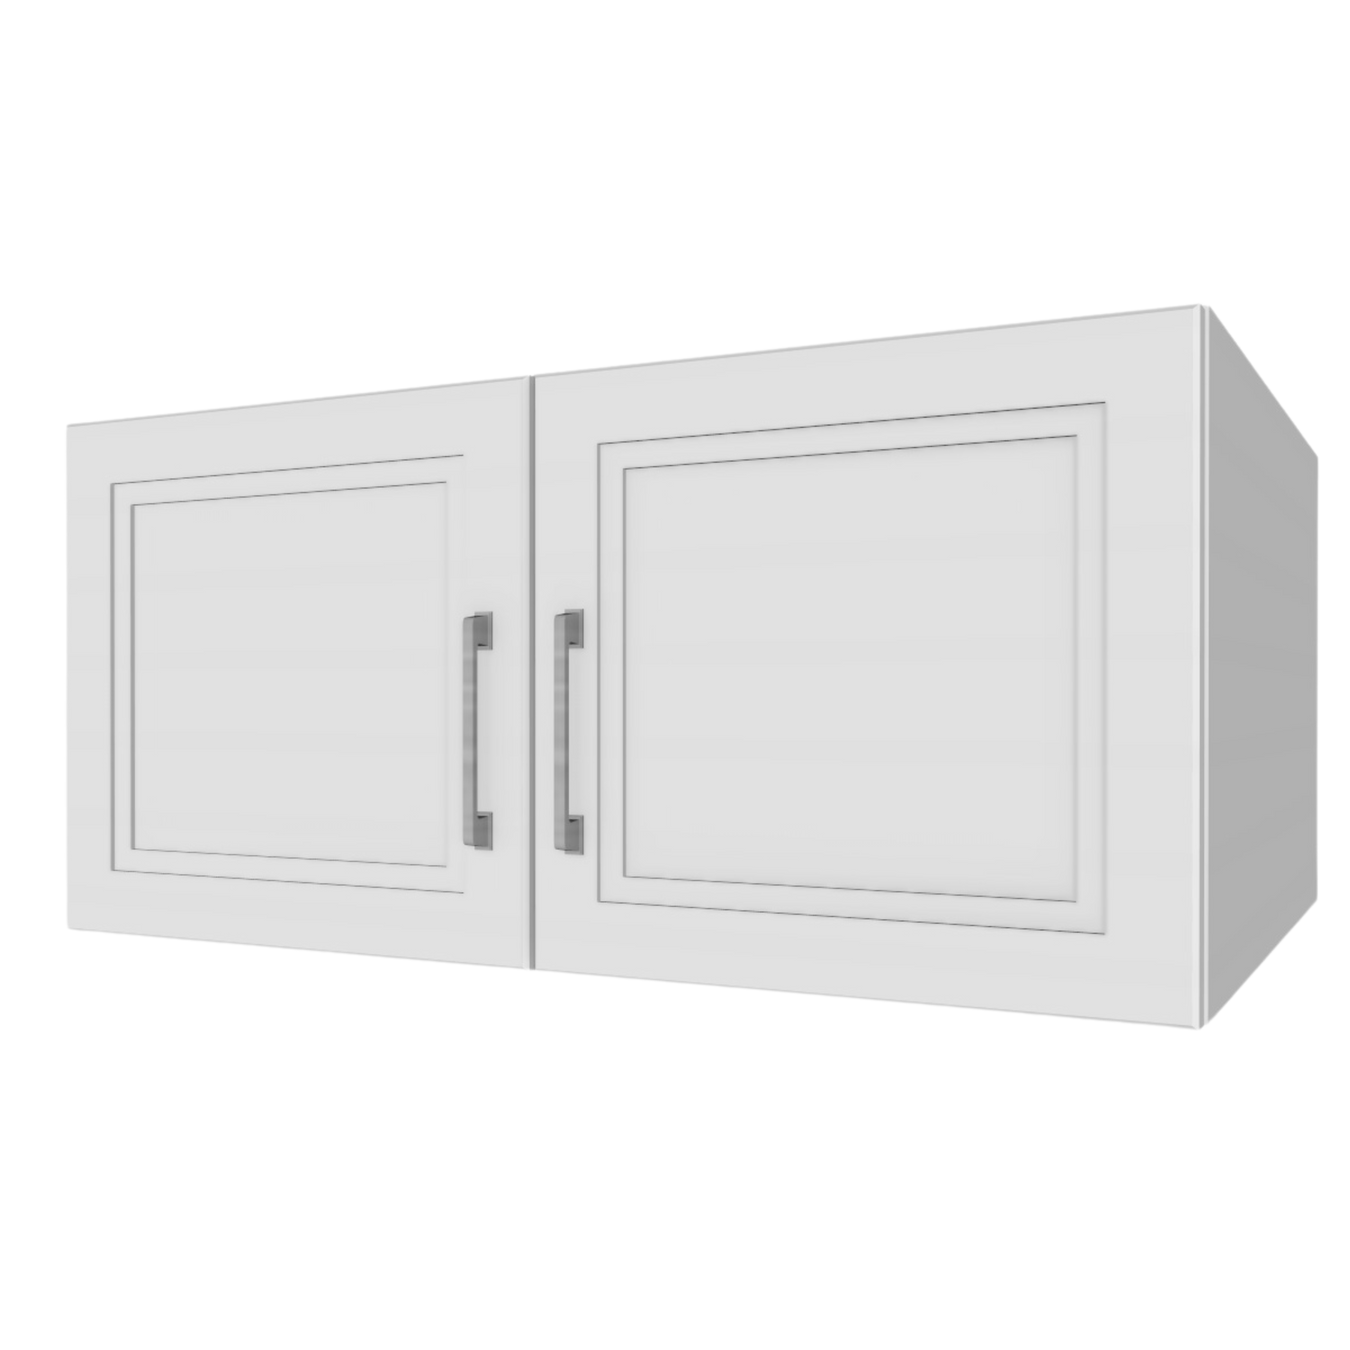 Stove and Fridge Cabinets - Painted Doors